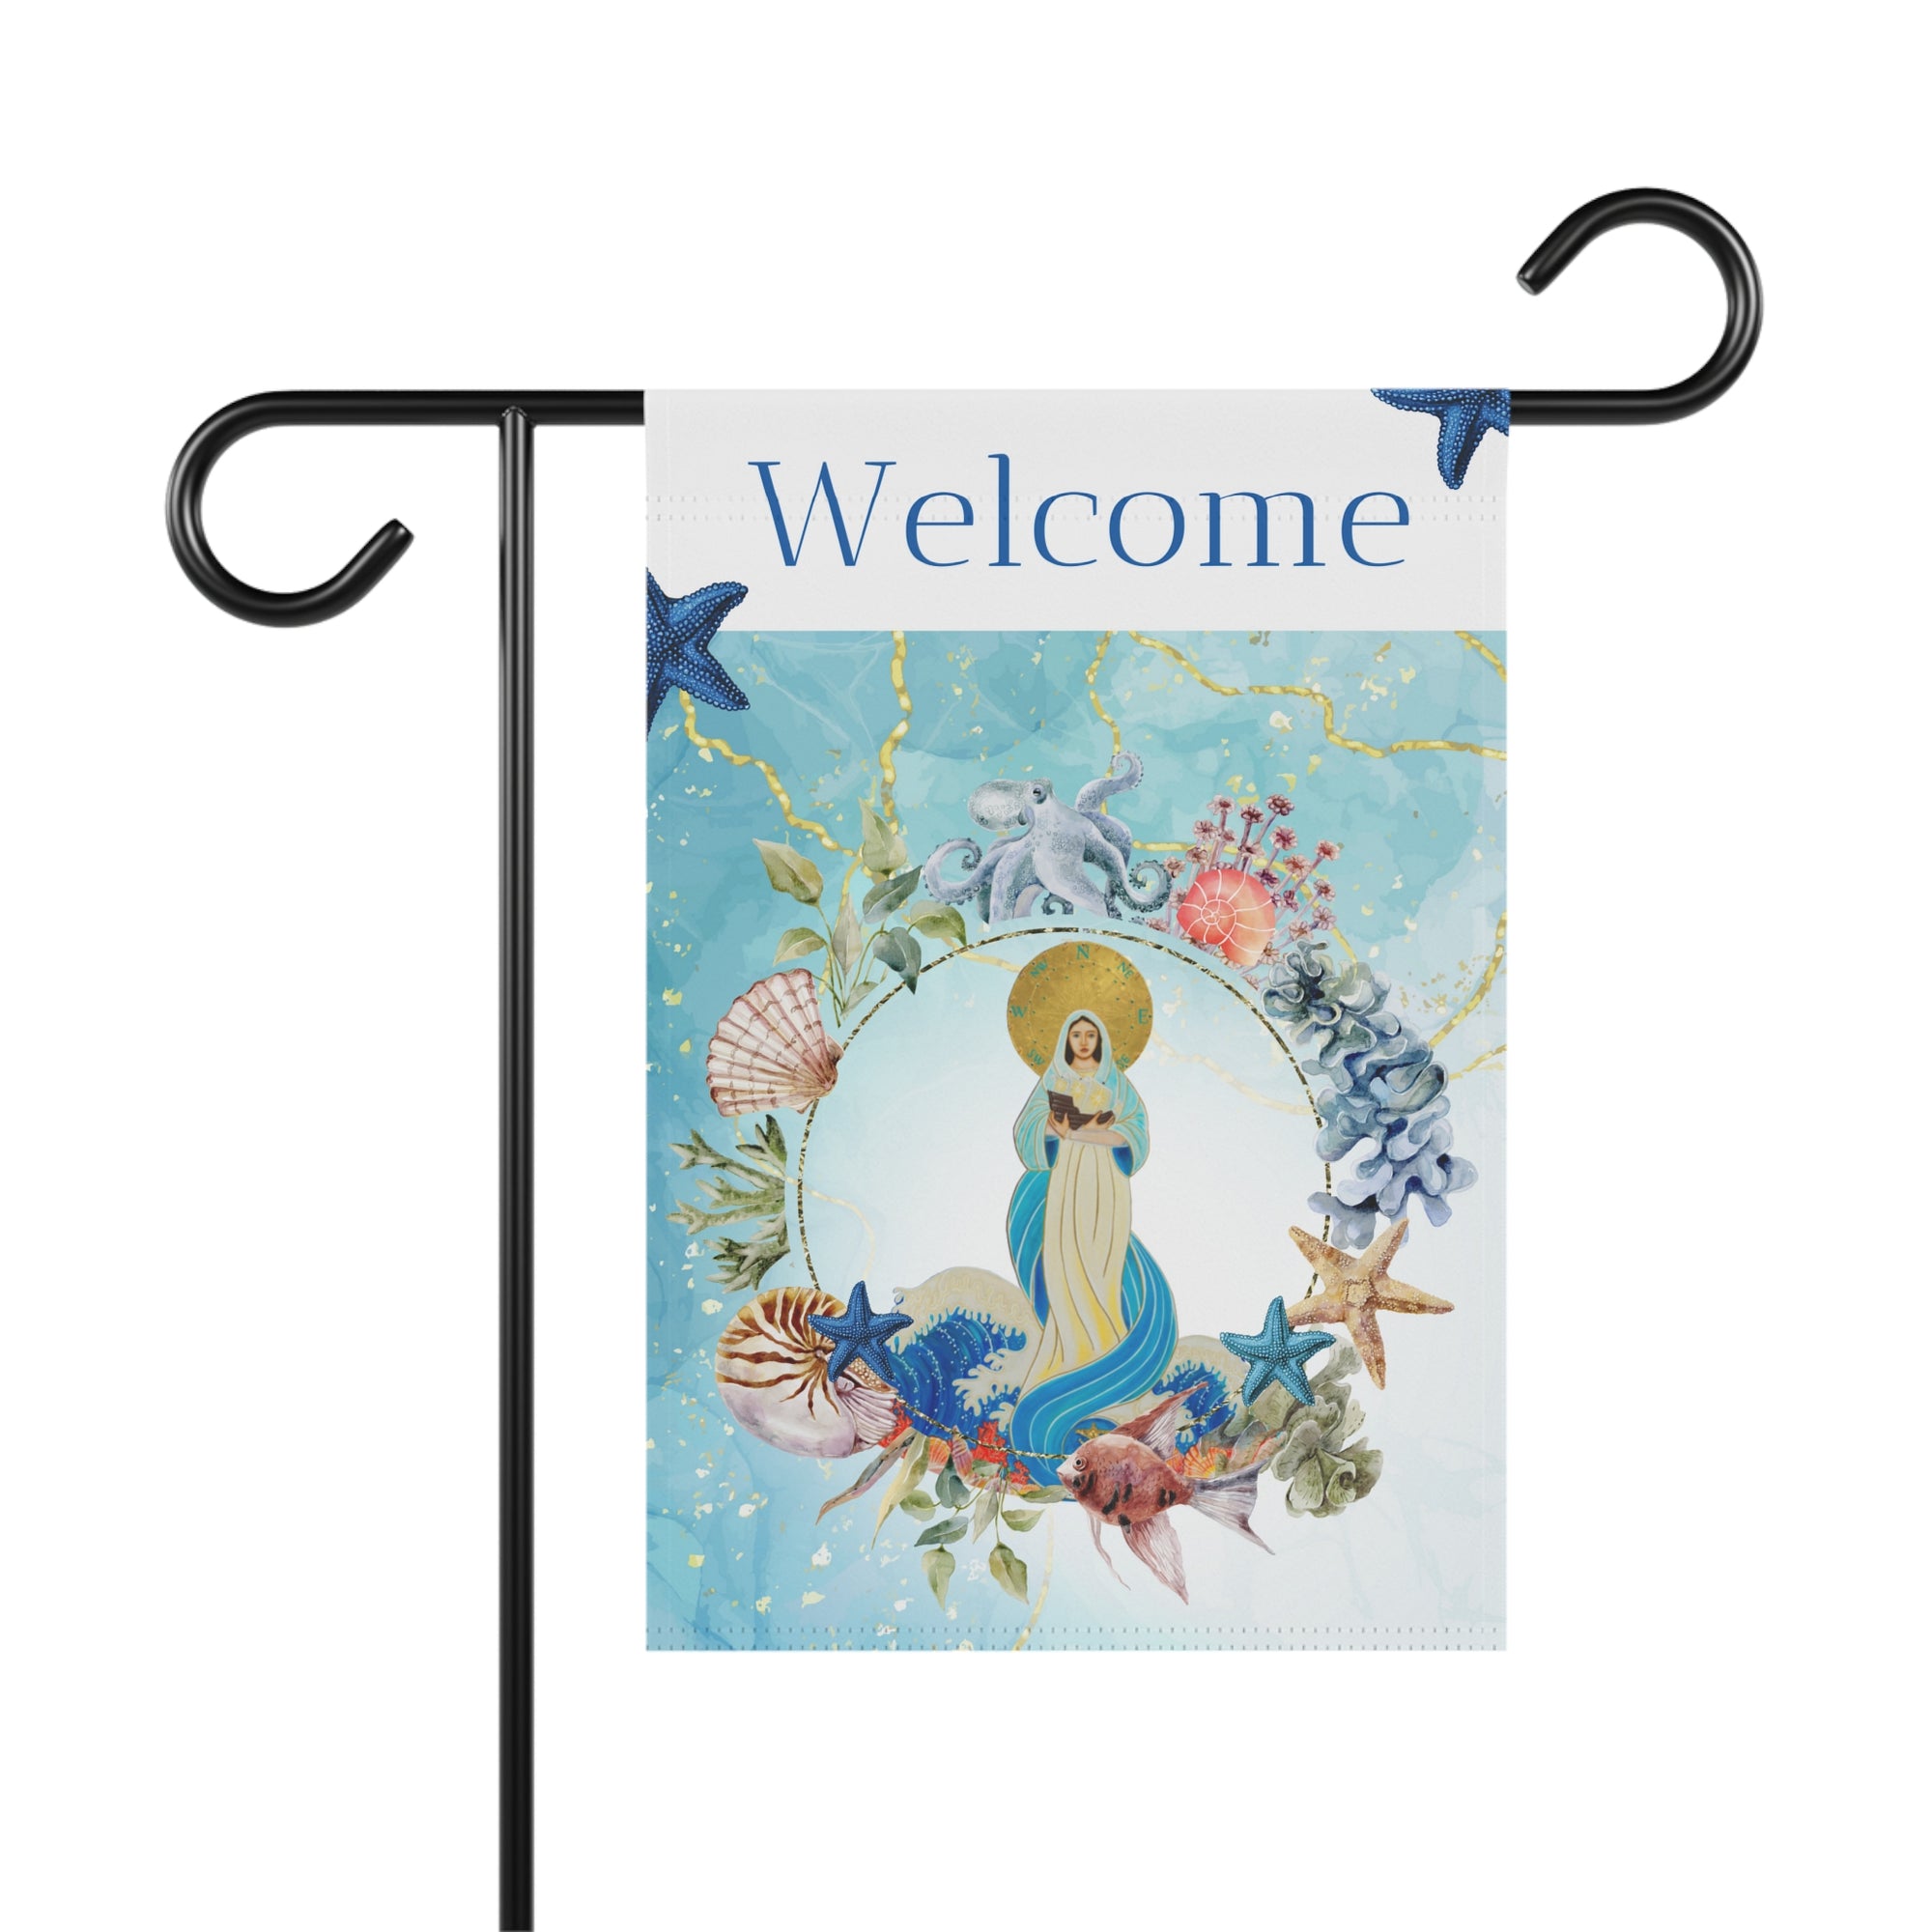 Our Lady Star of the Sea Garden flag